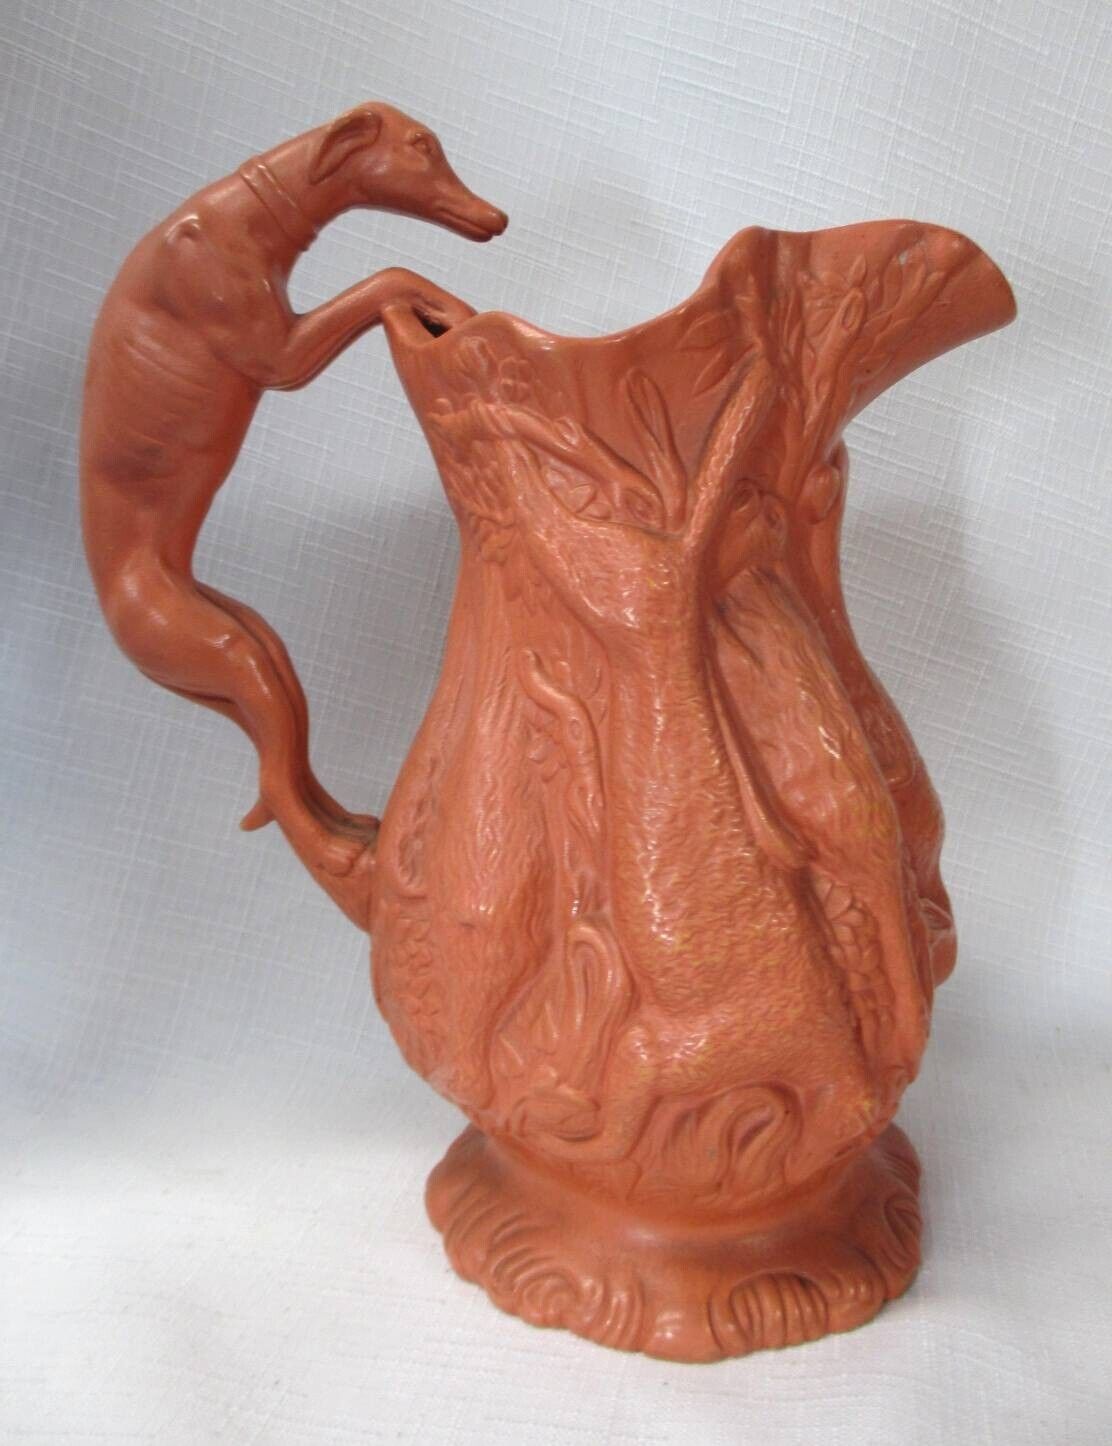 RARE STAFFORDSHIRE RED PARIAN WARE HANGING GAME MOULDED JUG WITH HOUND HANDLE